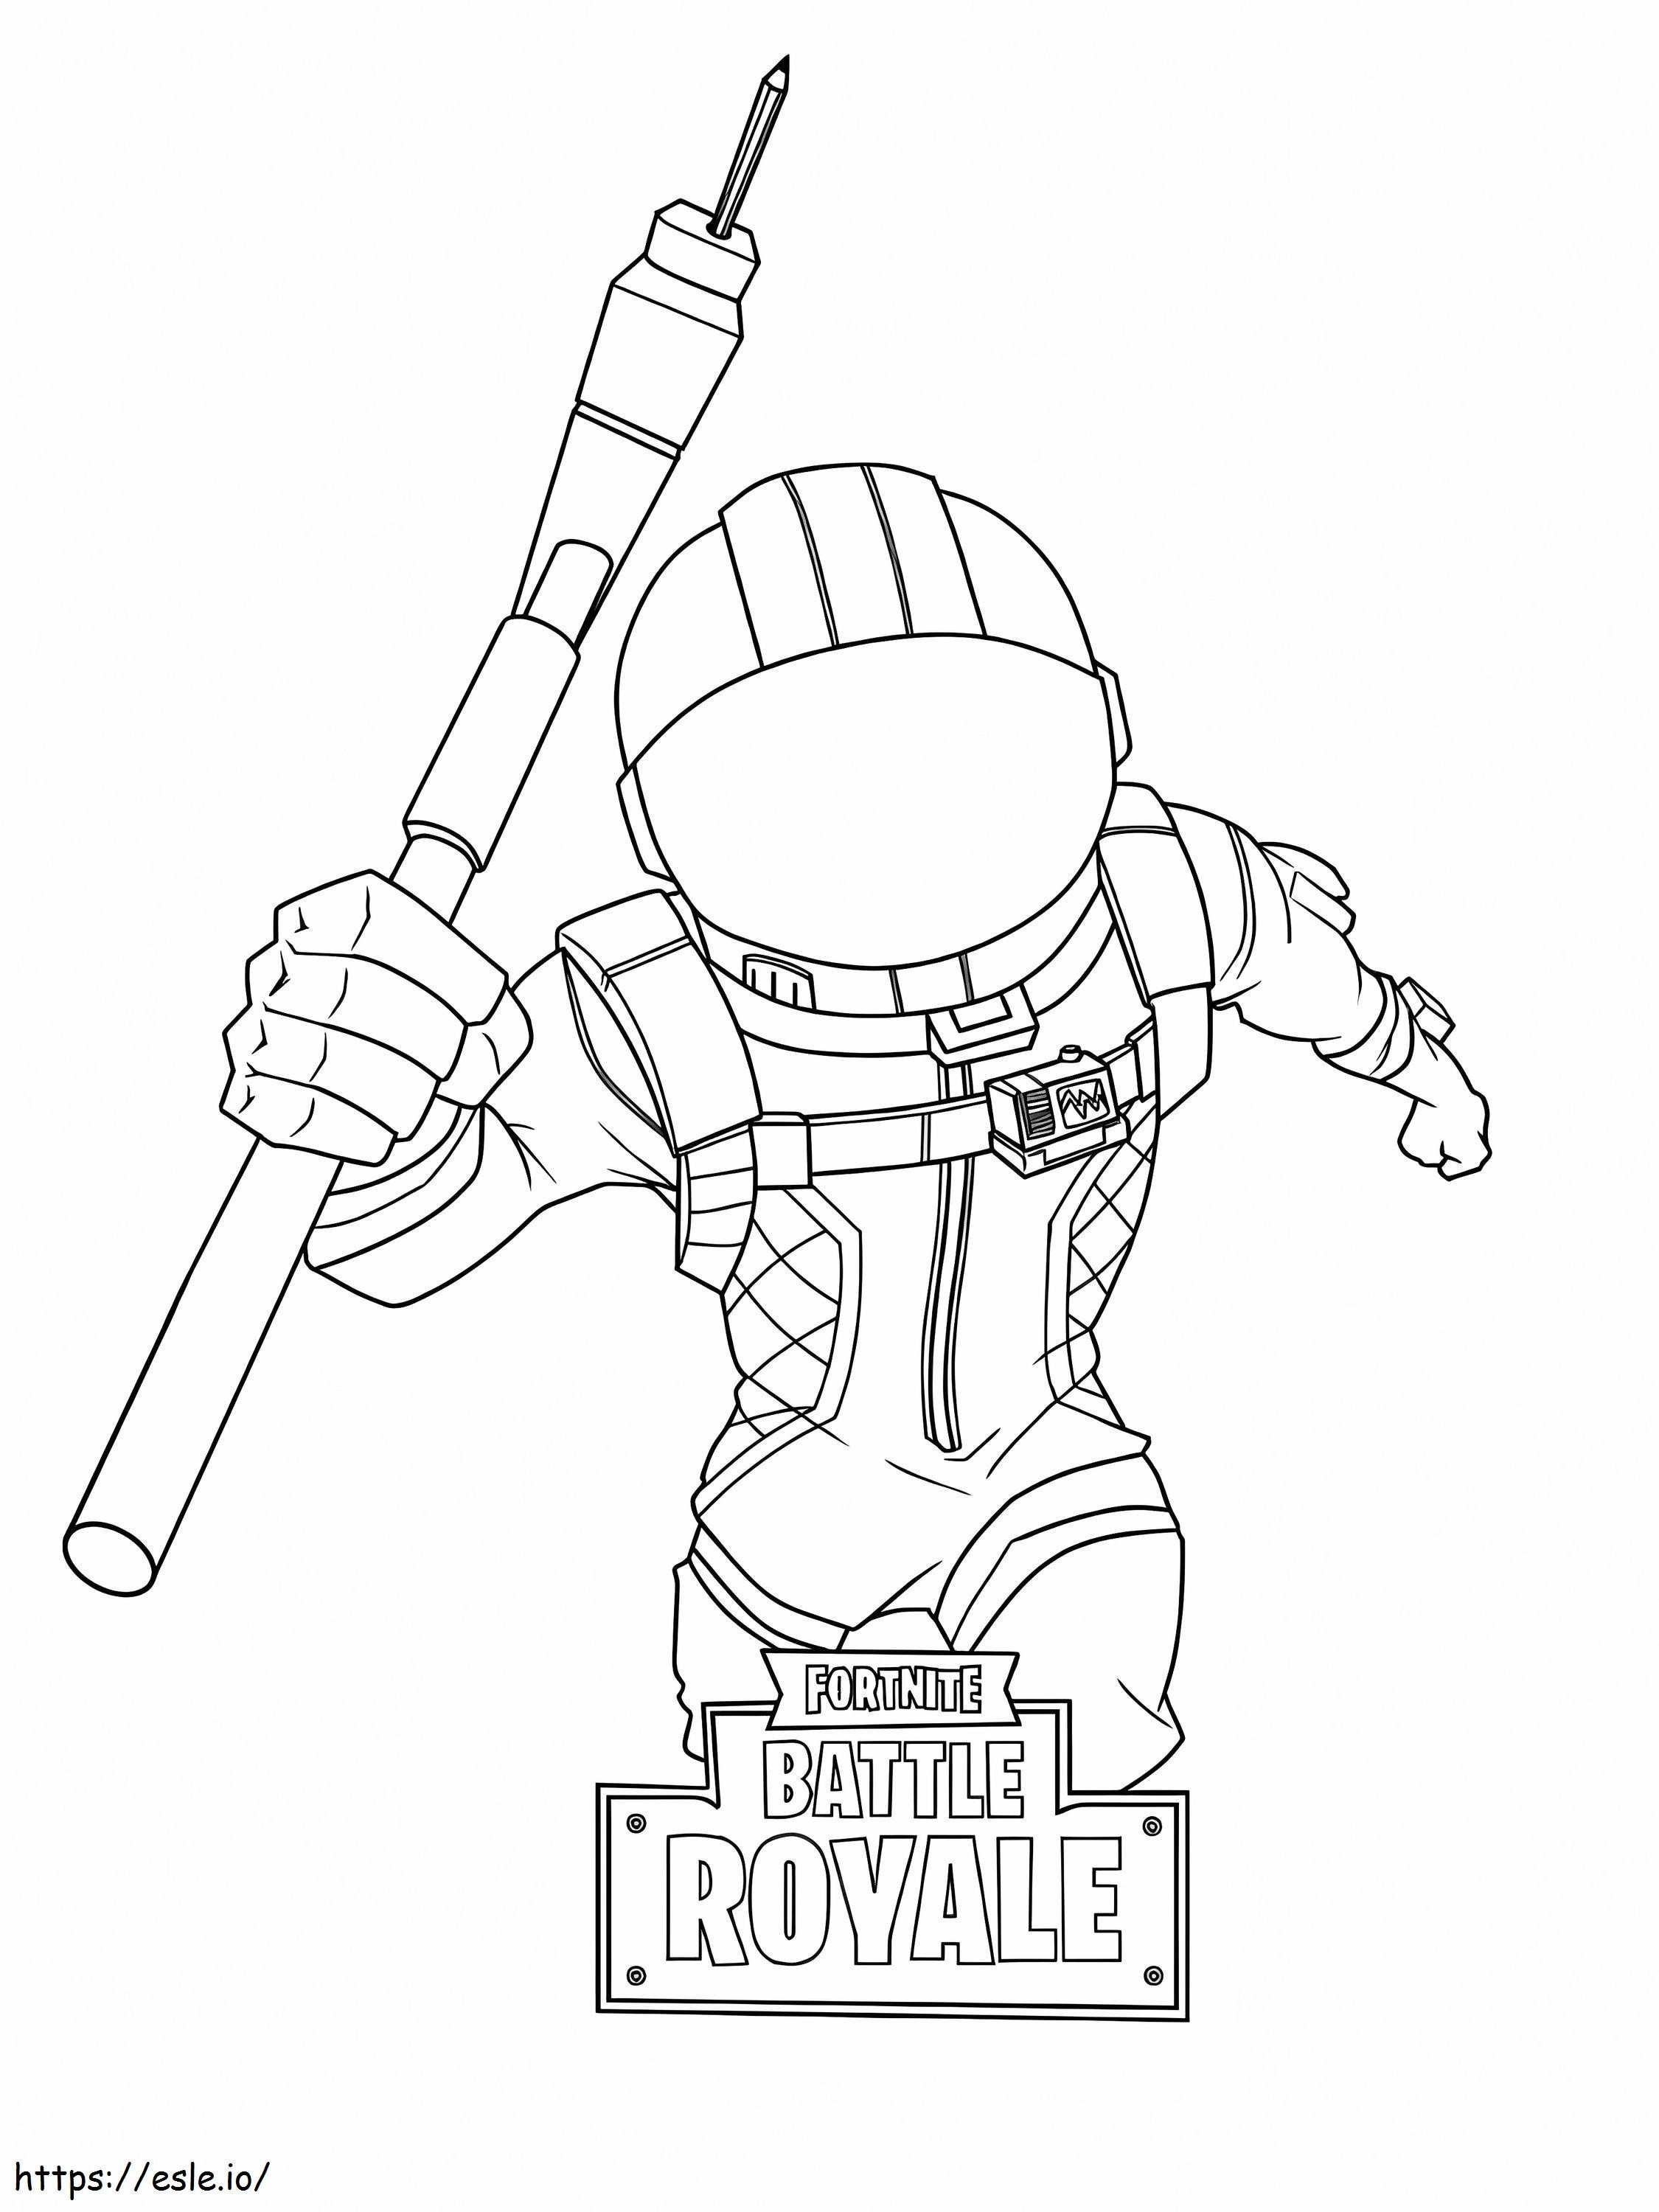 Dark Voyager Fortnite 768X1024 coloring page